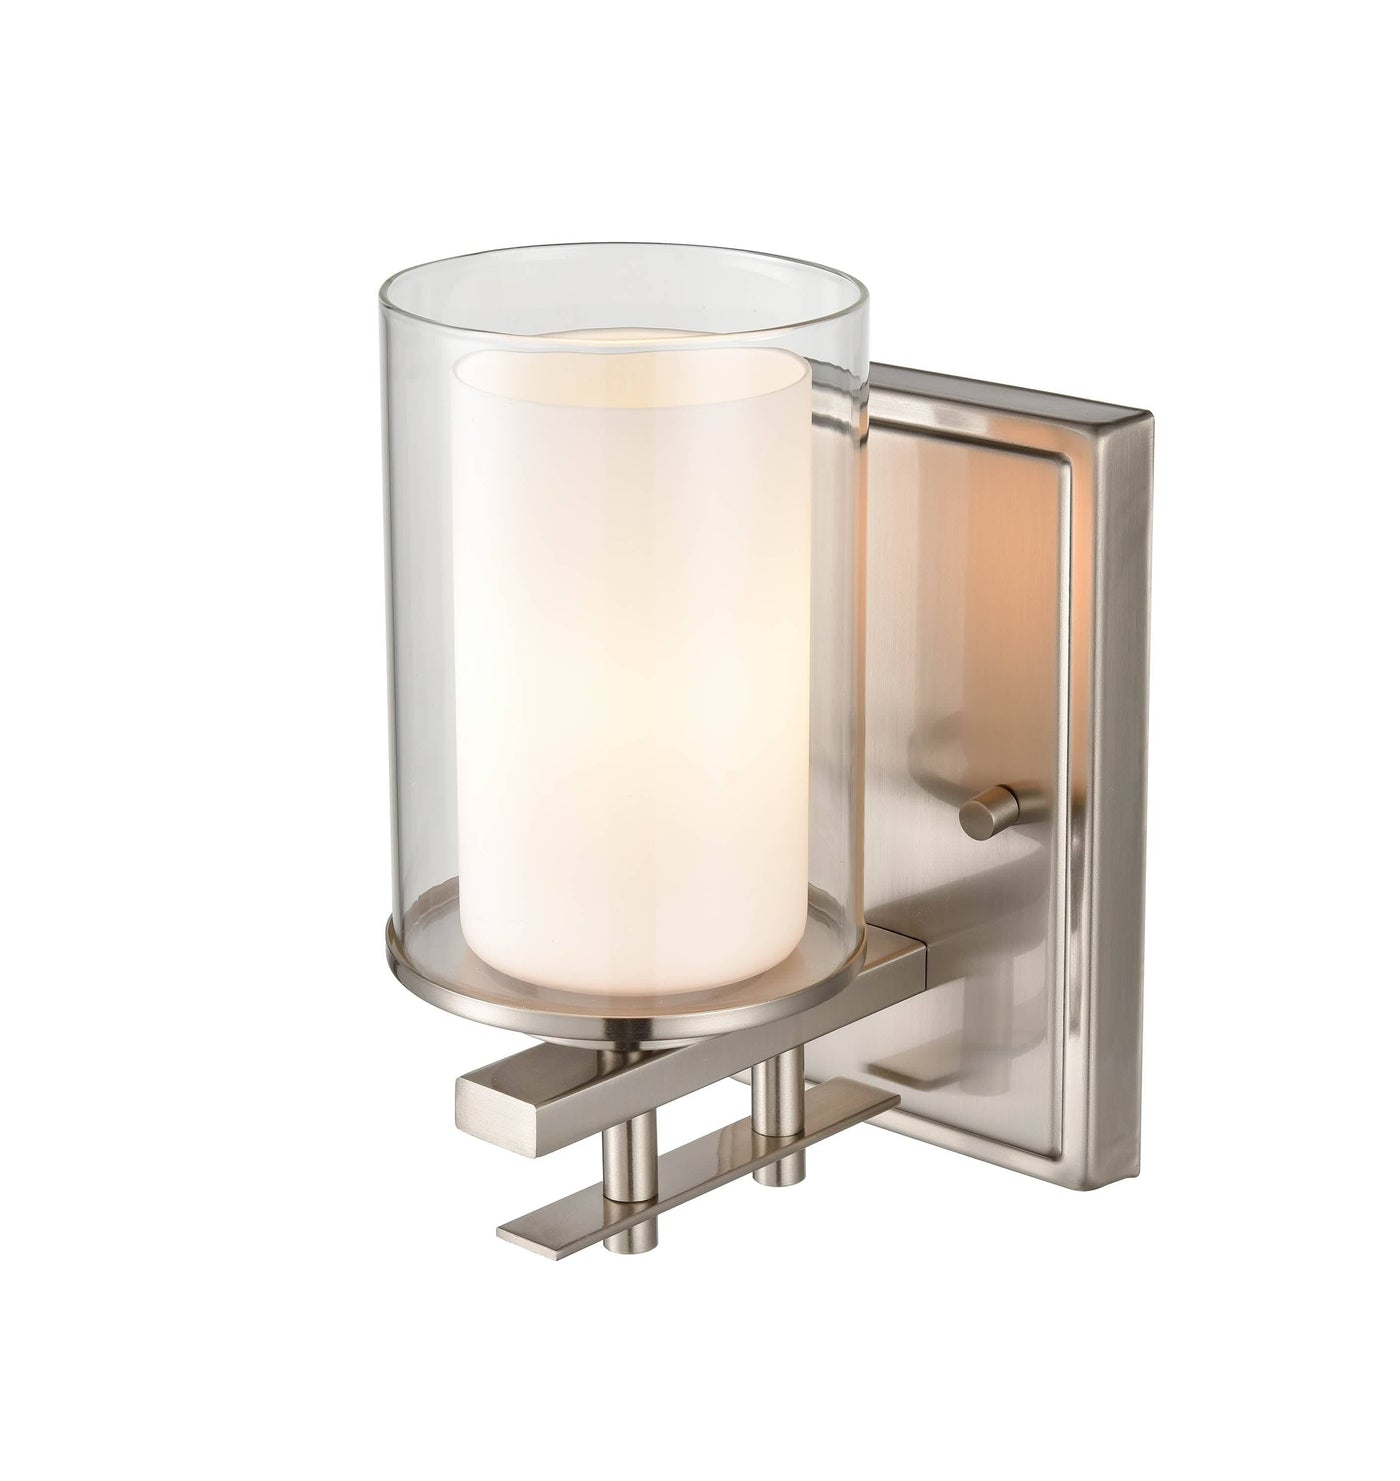 Huderson Wall Sconce - Brushed Nickel - Clear Out / Etched White Insid